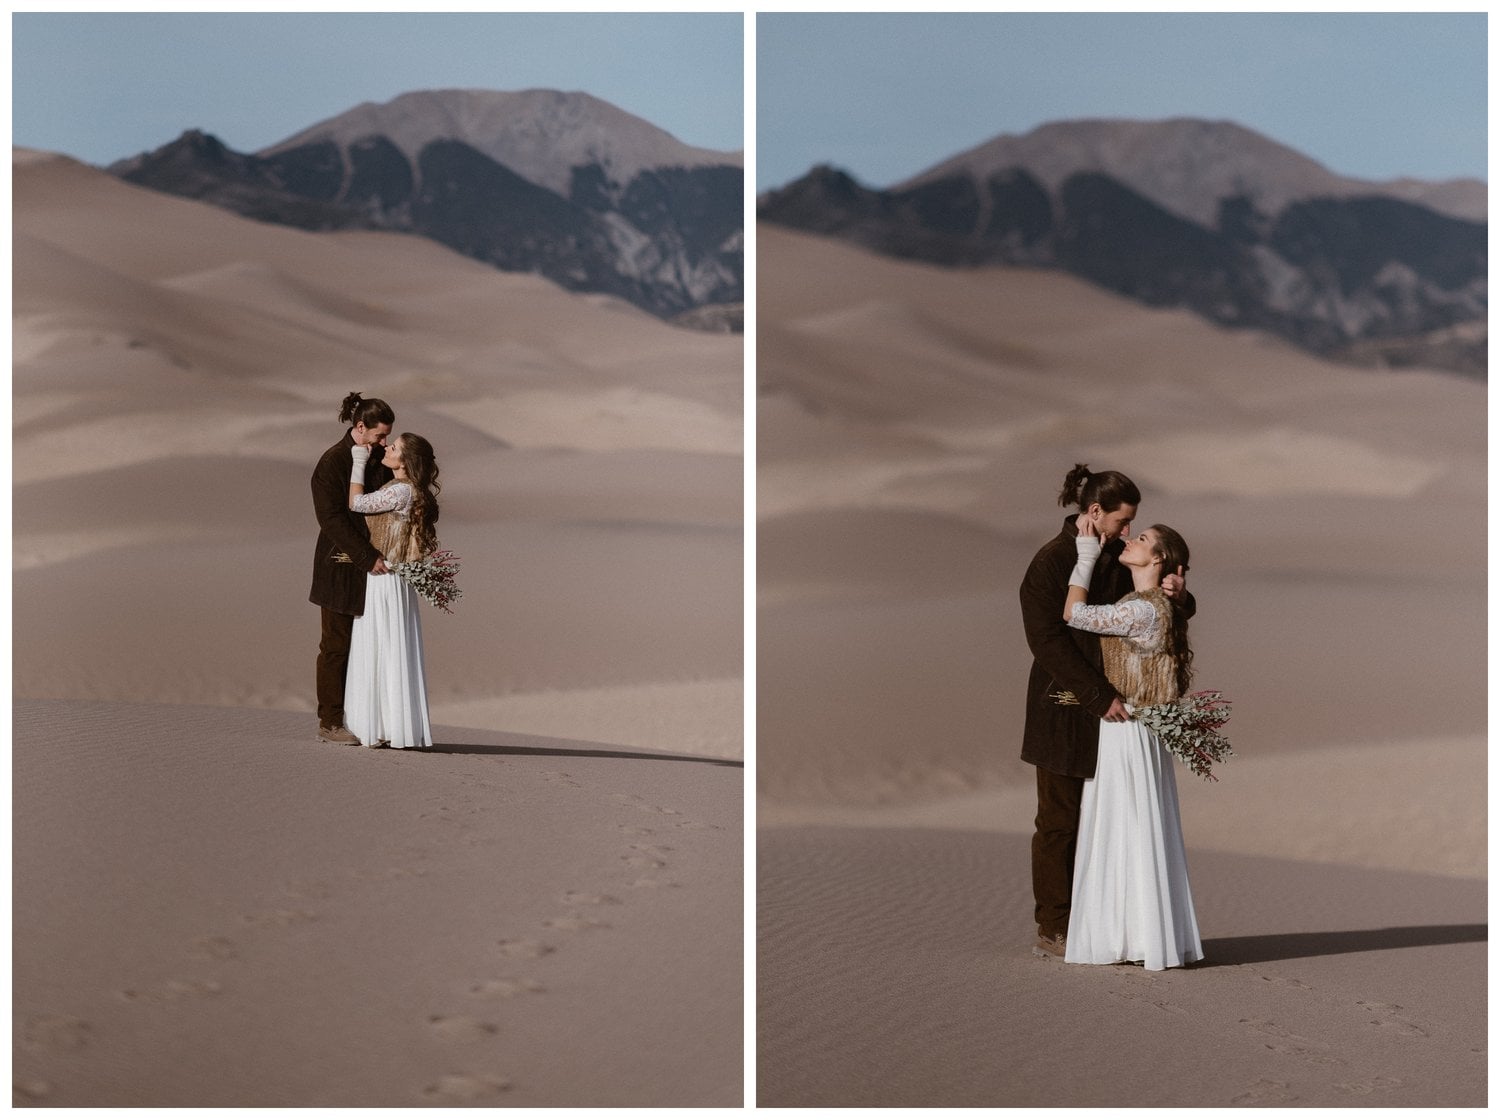 Bride and groom embrace in Great Sand Dunes National Park, with mountains in background. 